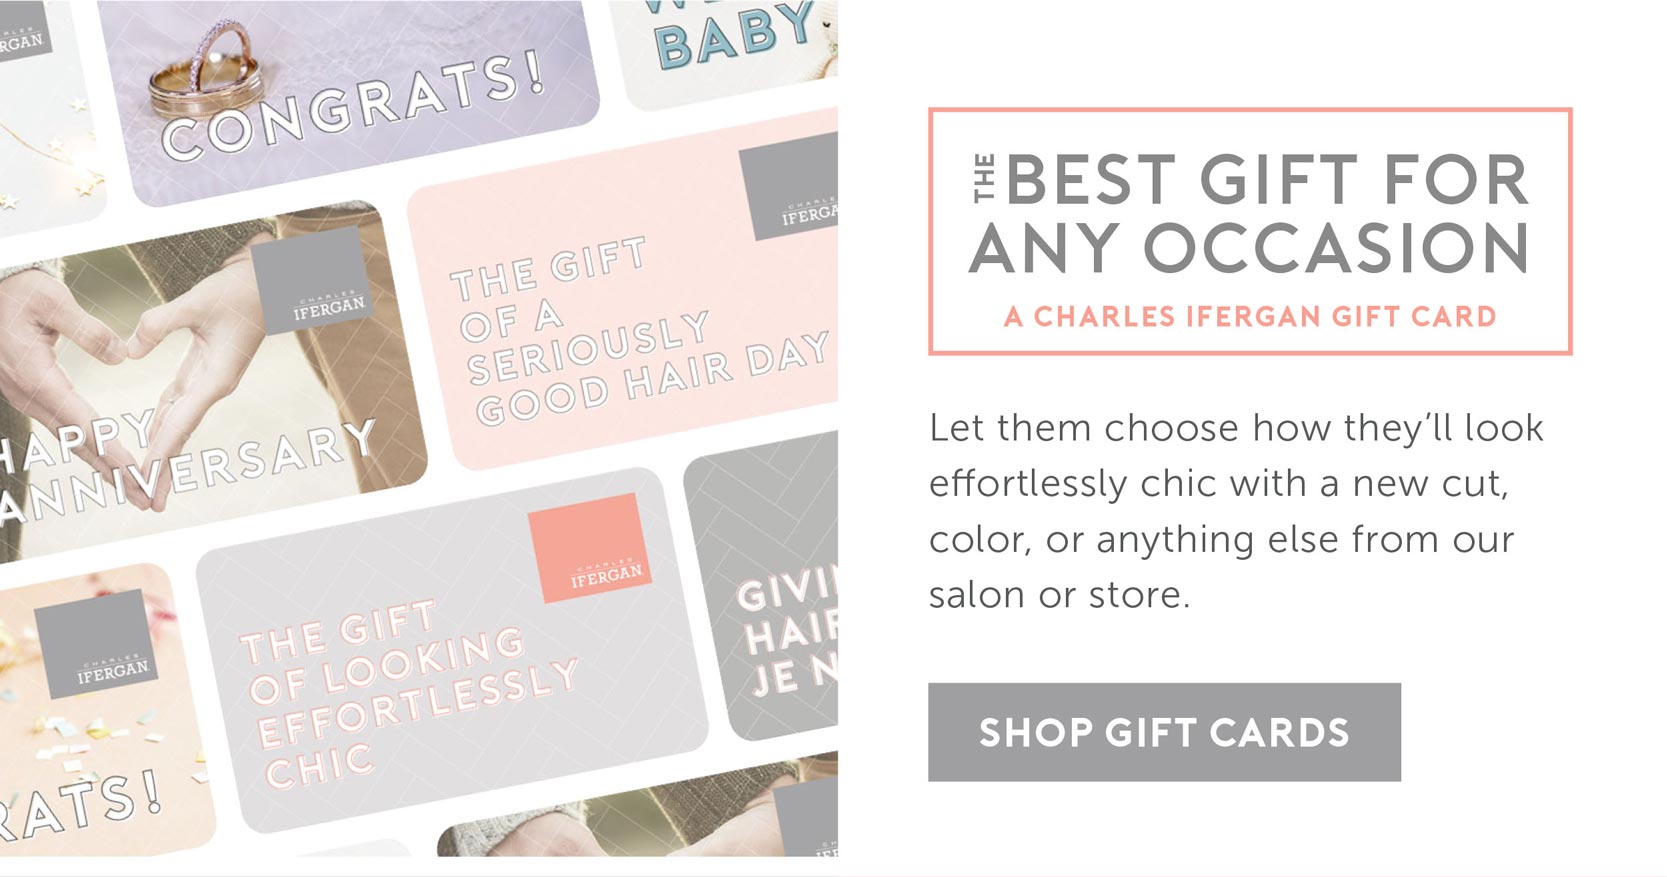 The best gift for any occasion: A Charles Ifergan Gift Card. Let them choose how they'll look effortlessly chic